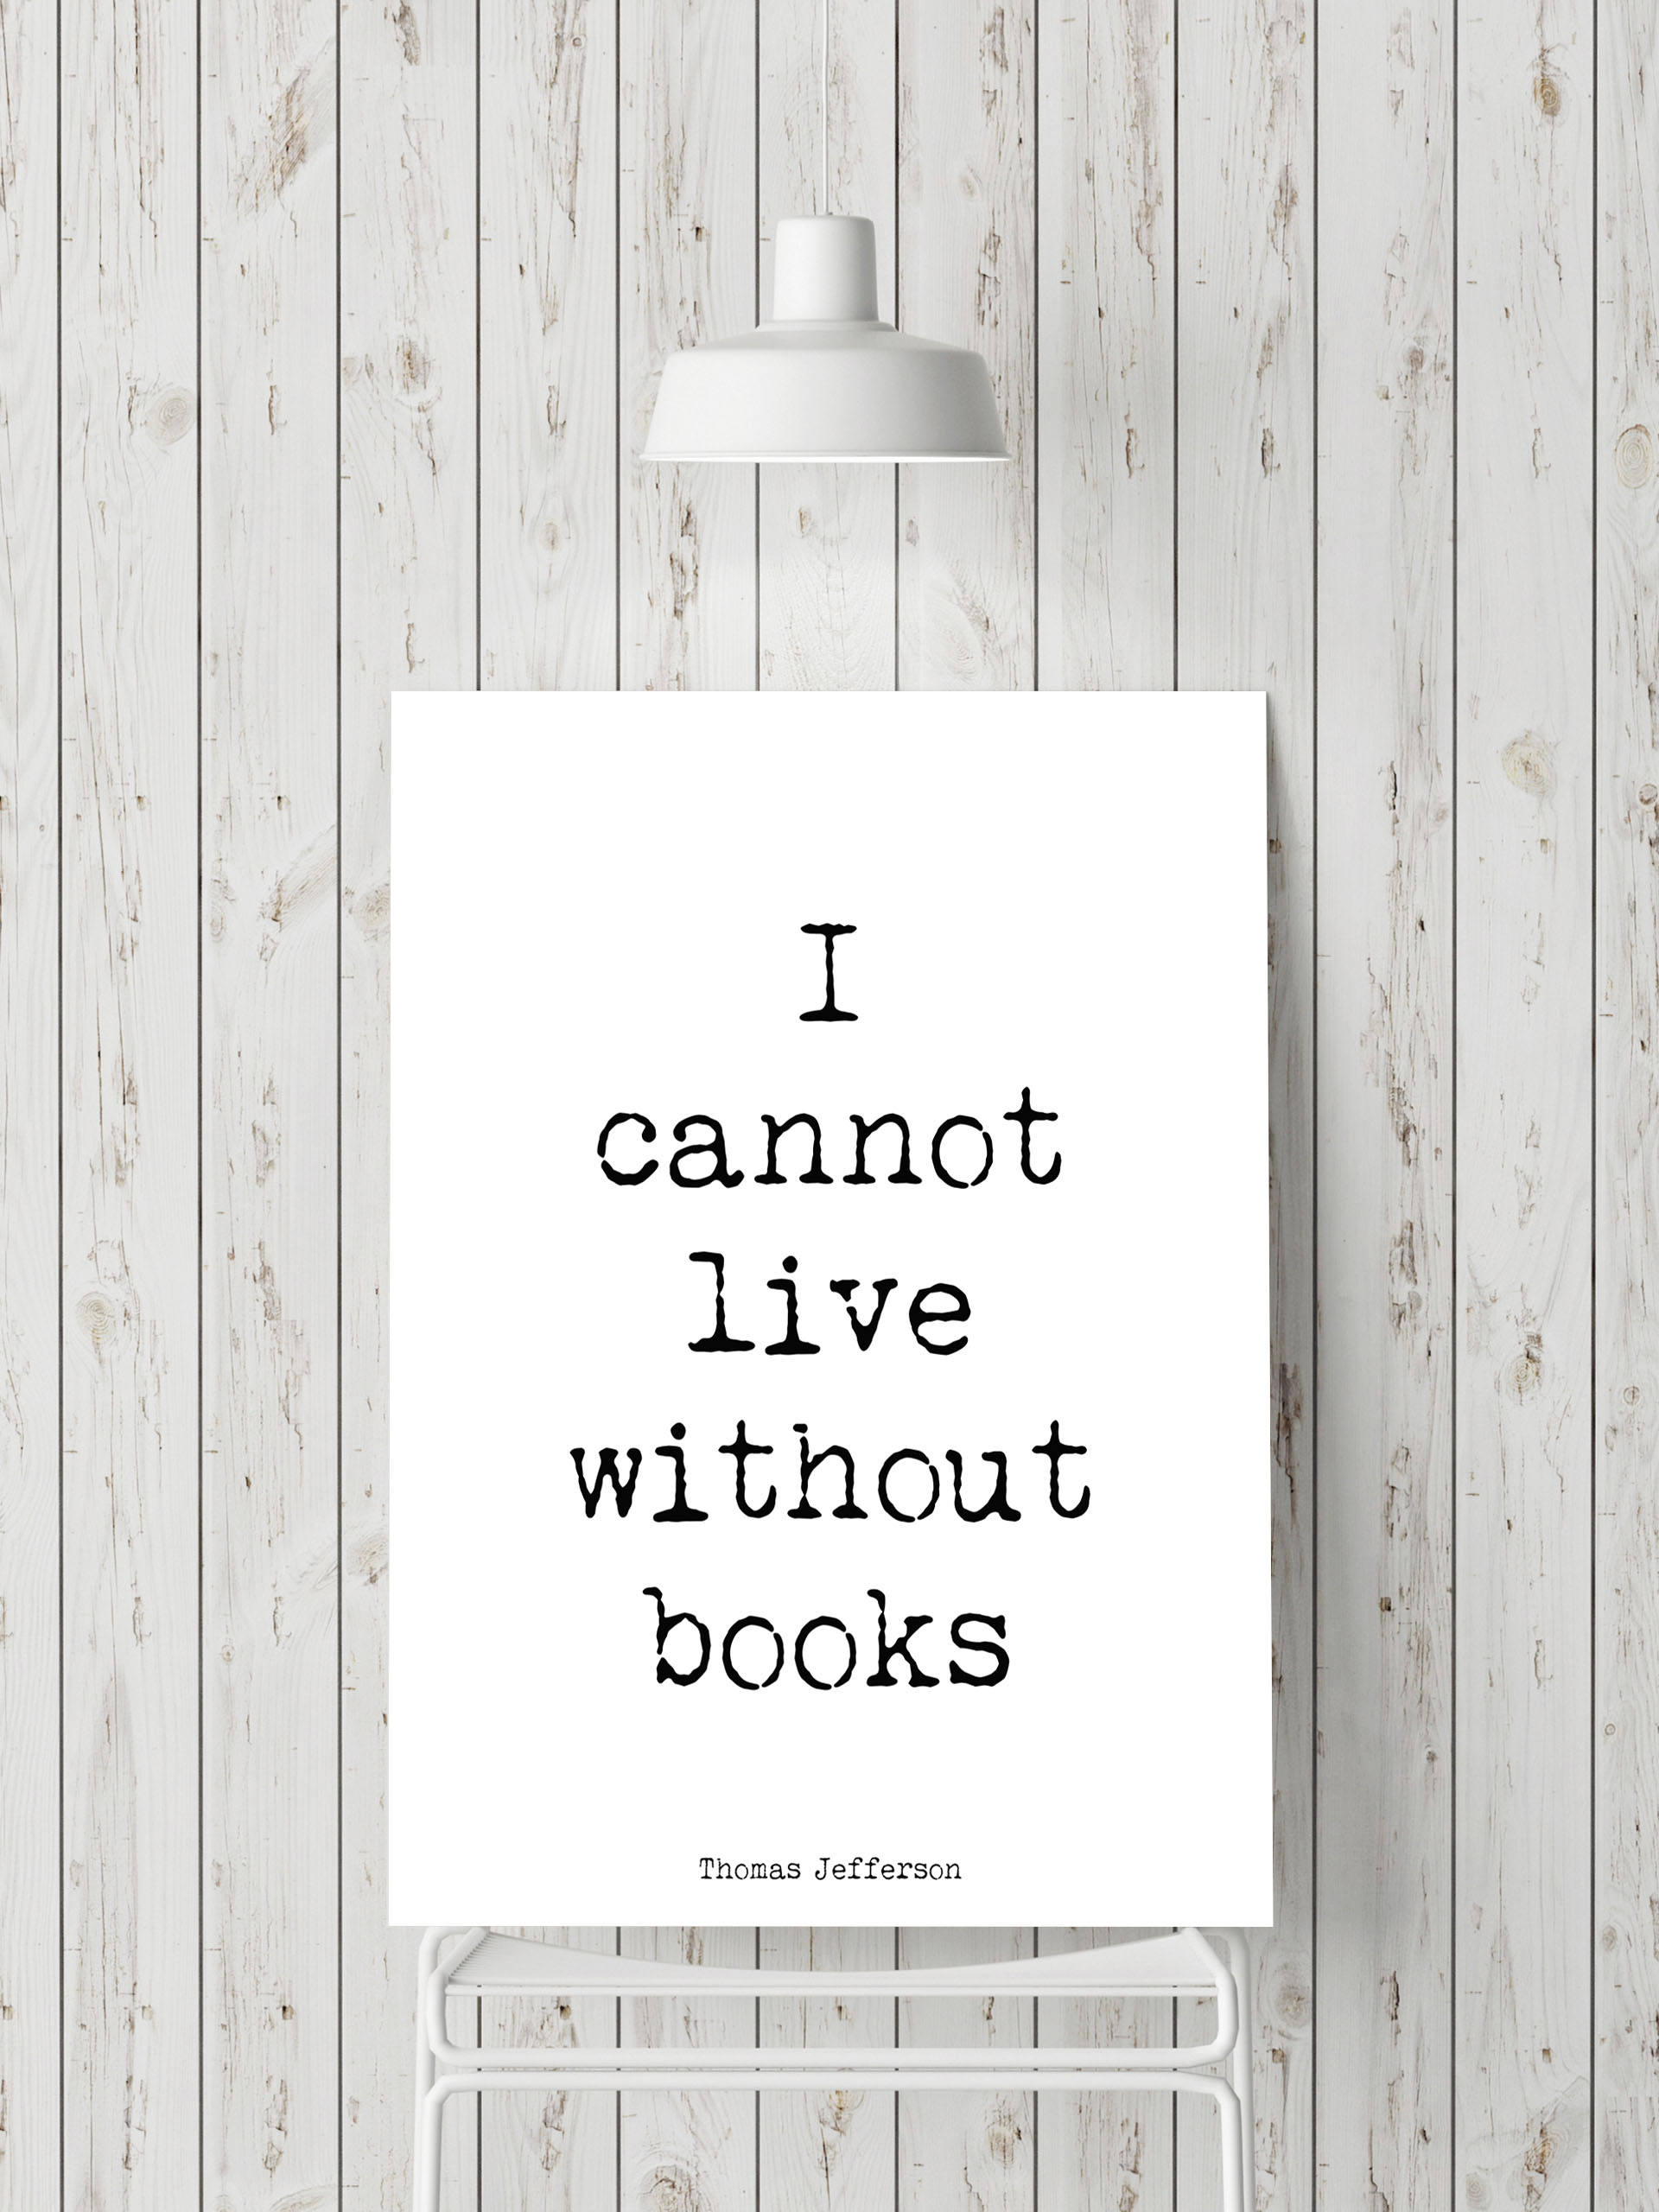 Thomas Jefferson Quote Book Reading Print, unframed black & white art, library decor, read books print, I cannot live without books - BookQuoteDecor